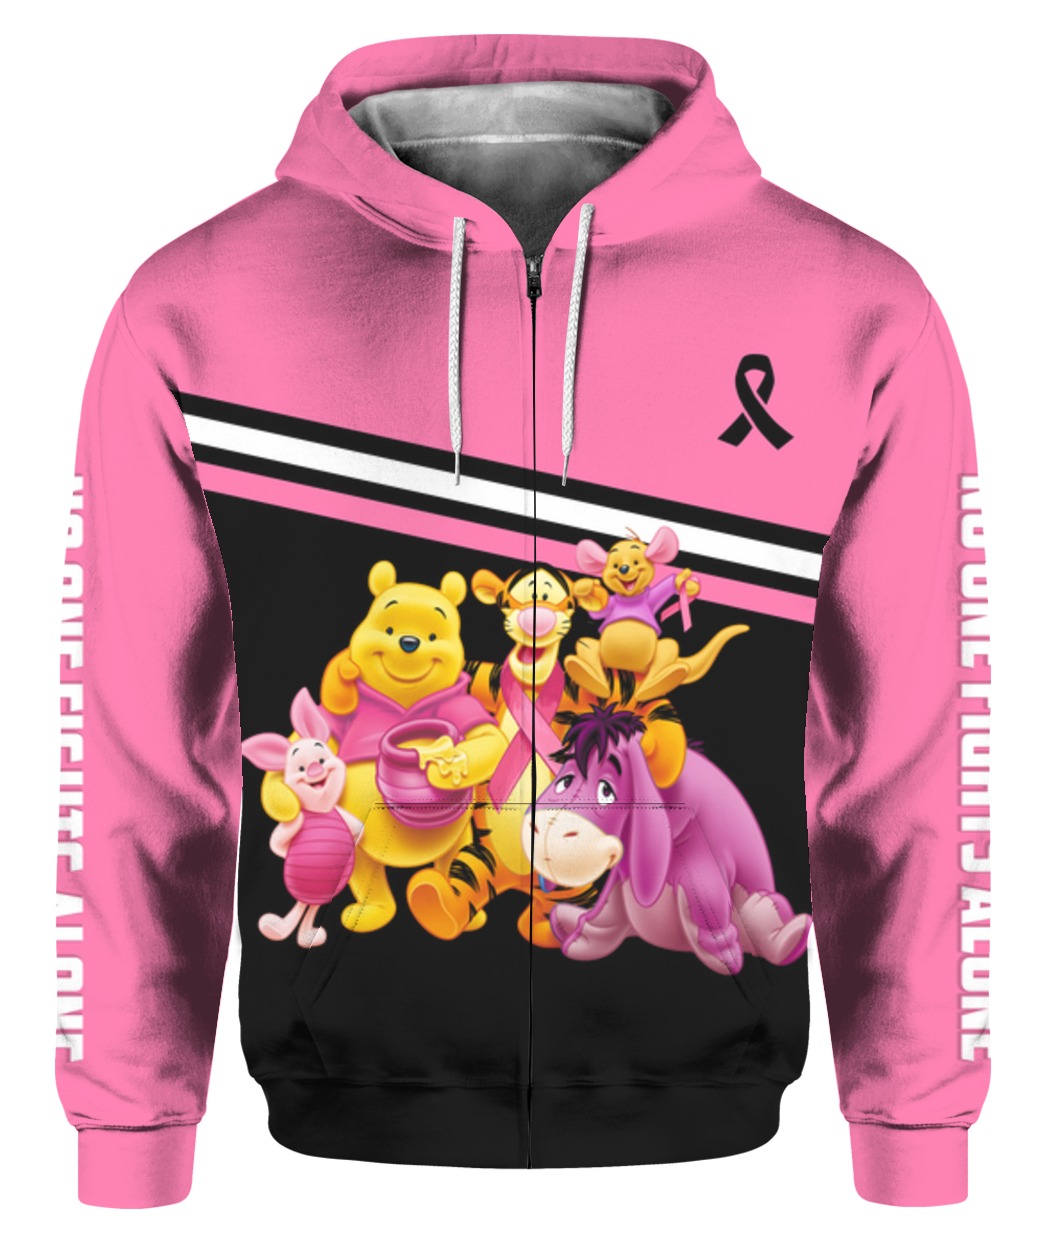 Winnie-the-pooh breast cancer awareness all over printed zip hoodie